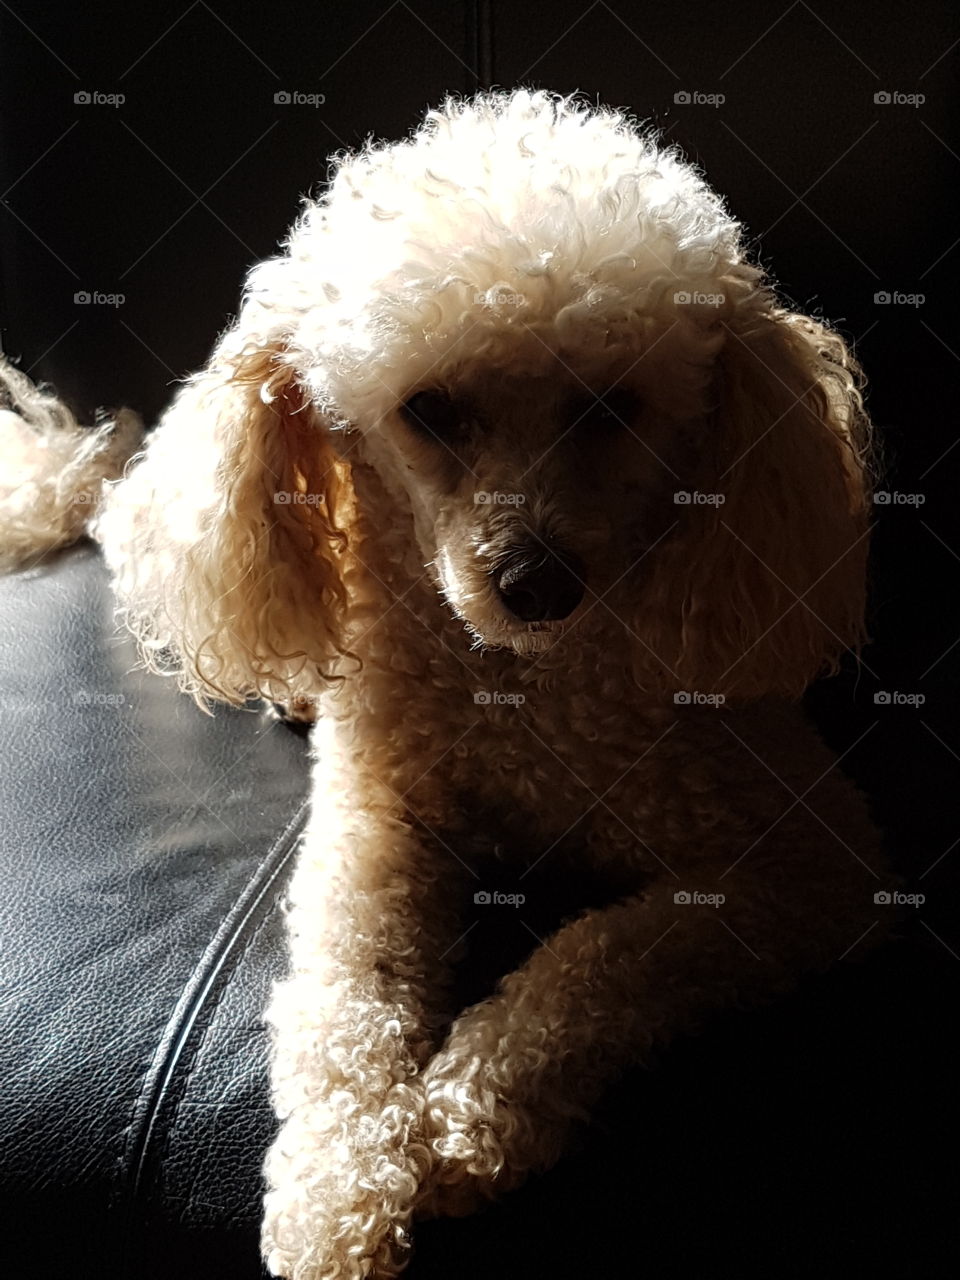 A toy poodle, Light and shadow.